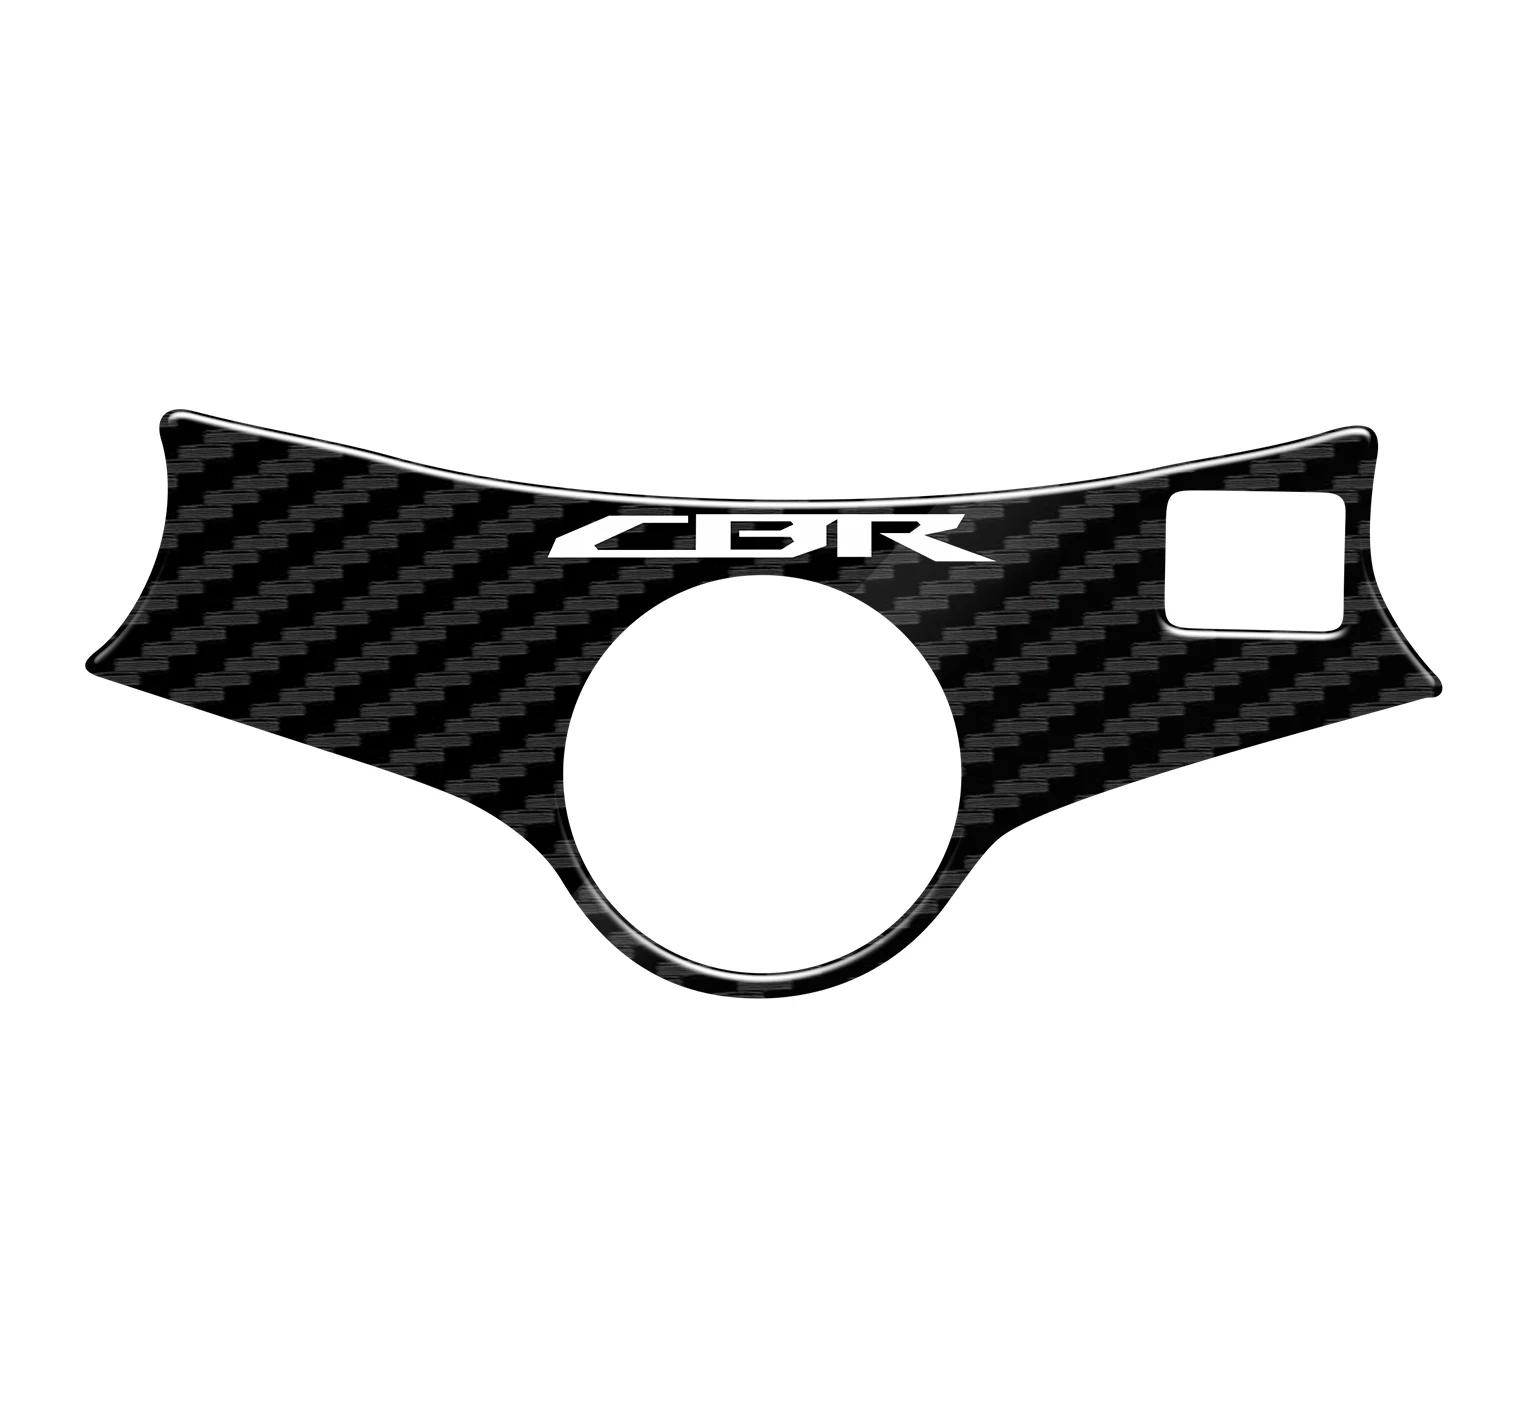 3D Motorcycle Carbon Fiber Pattern Top Triple Clamp Yoke Sticker Case for HONDA CBR600 F4 F4I 1999-2007 2002 2001 2003 2004 2005 1pc 3 4 buttons oucg8d 380h a 313 8mhz id46 car remote key for honda odyssey 2005 2010 accord 2003 2007 fob control